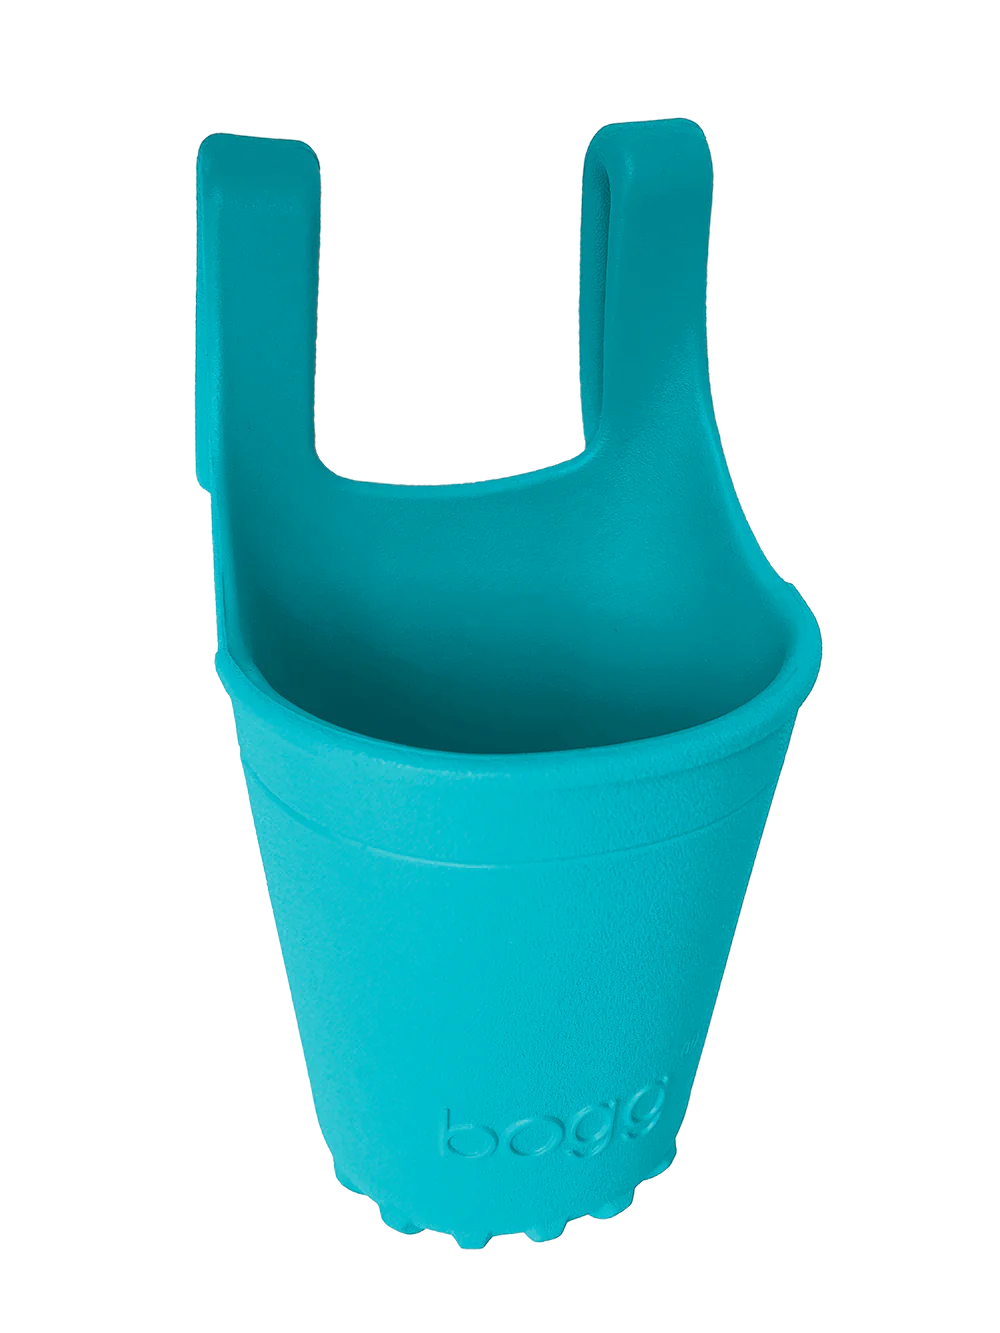 Turquoise And Caicos Bogg Bevy Cup Holder